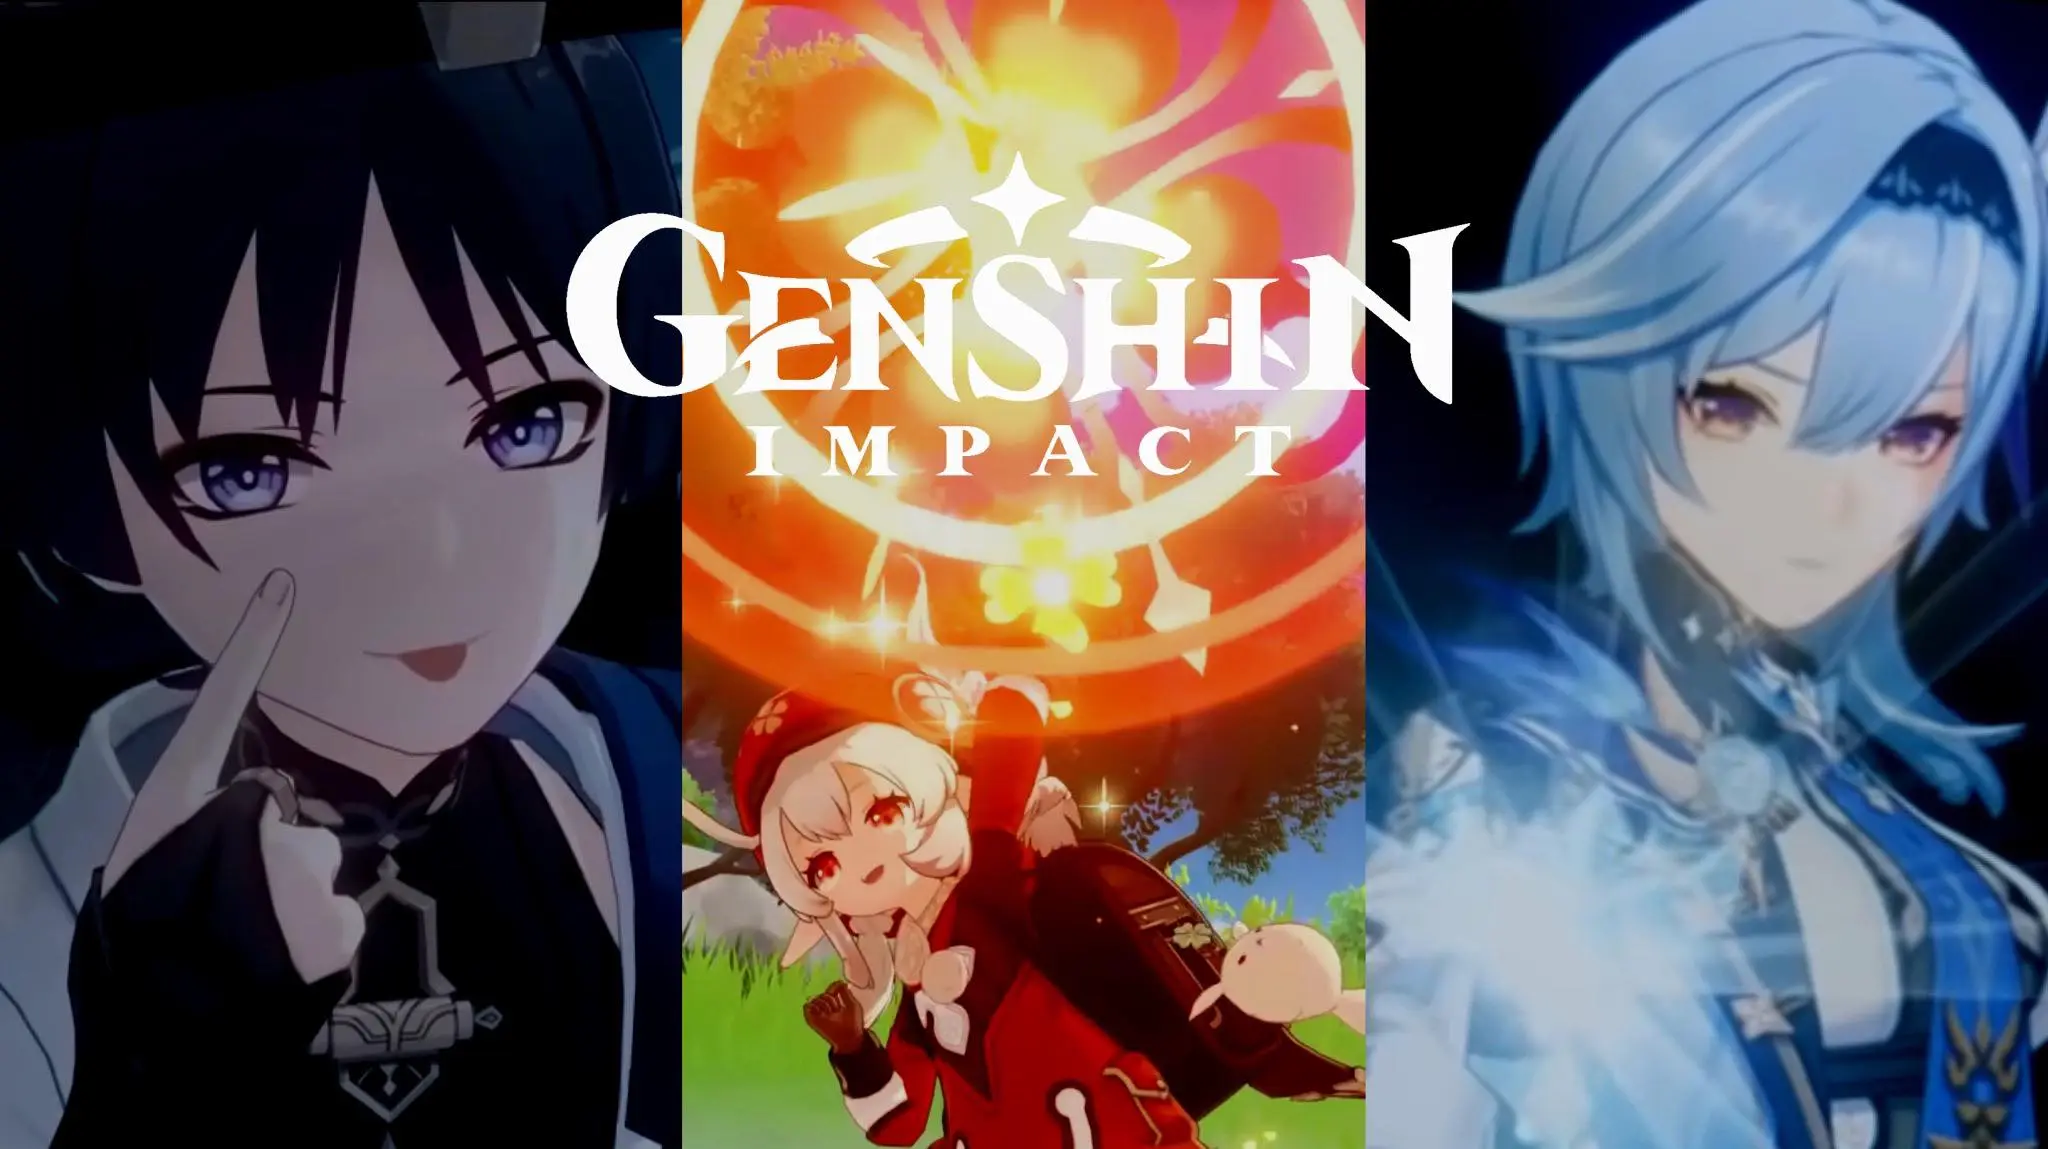 Genshin Impact Version 3.2 - Codes, Release Date, Banners, Events, and More